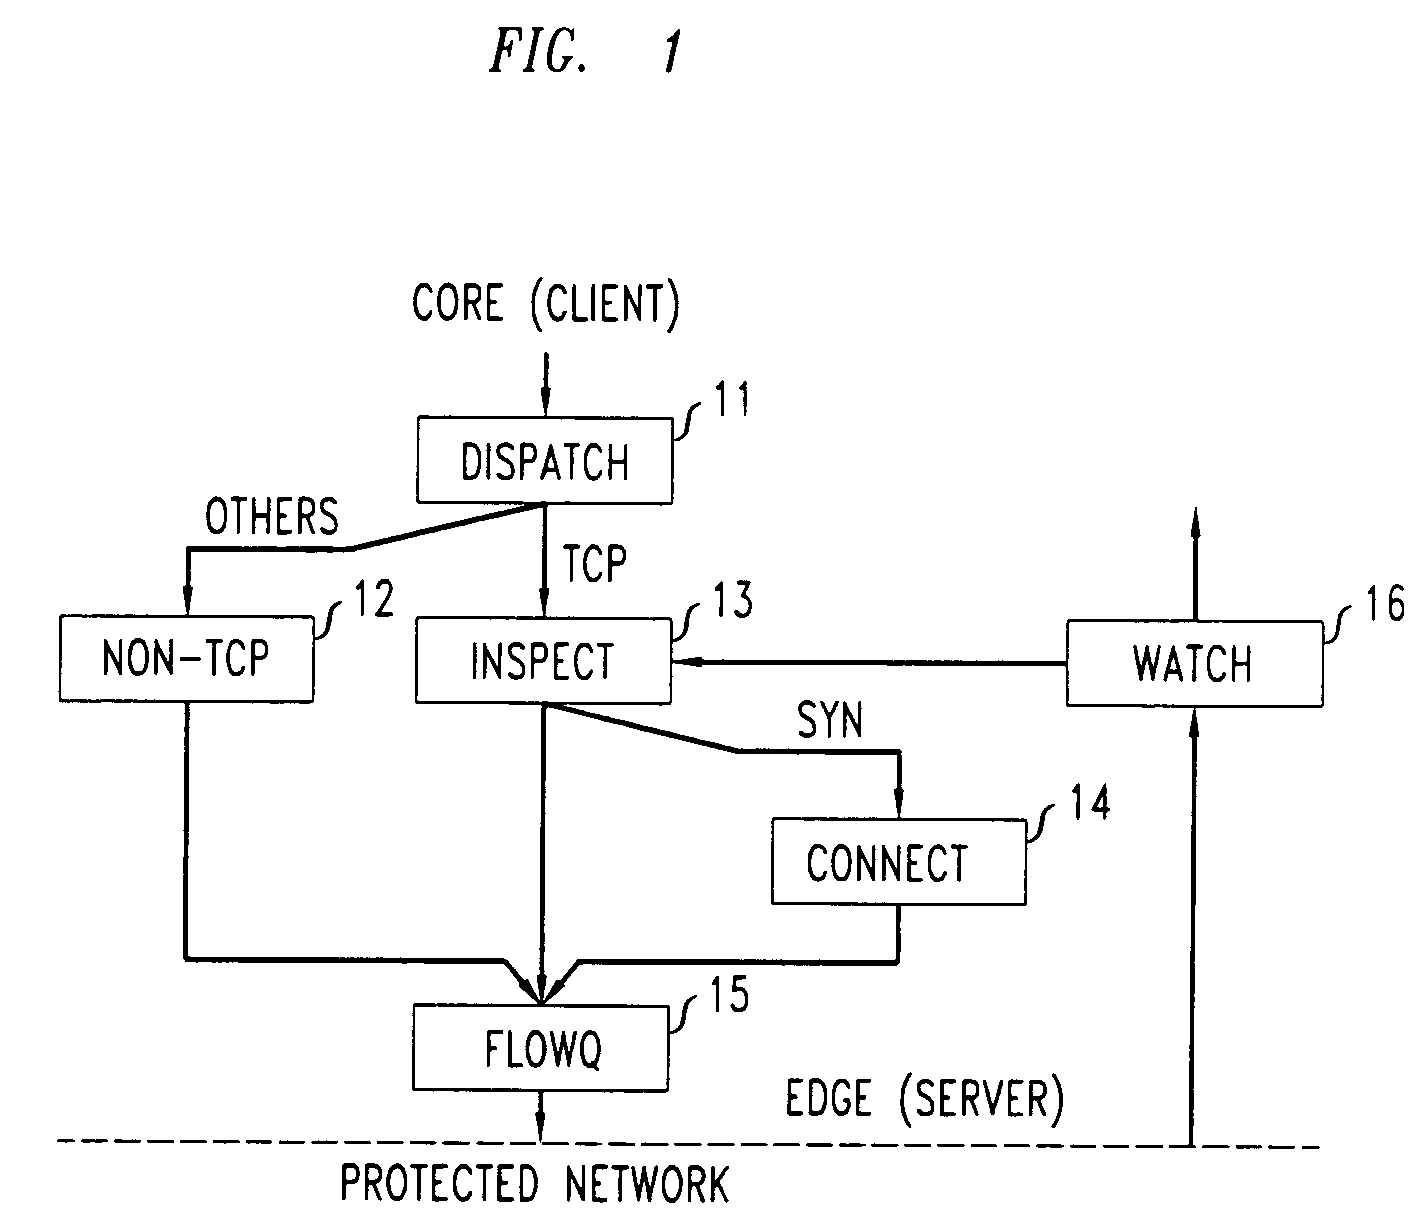 Method and apparatus for defending against SYN packet bandwidth attacks on TCP servers